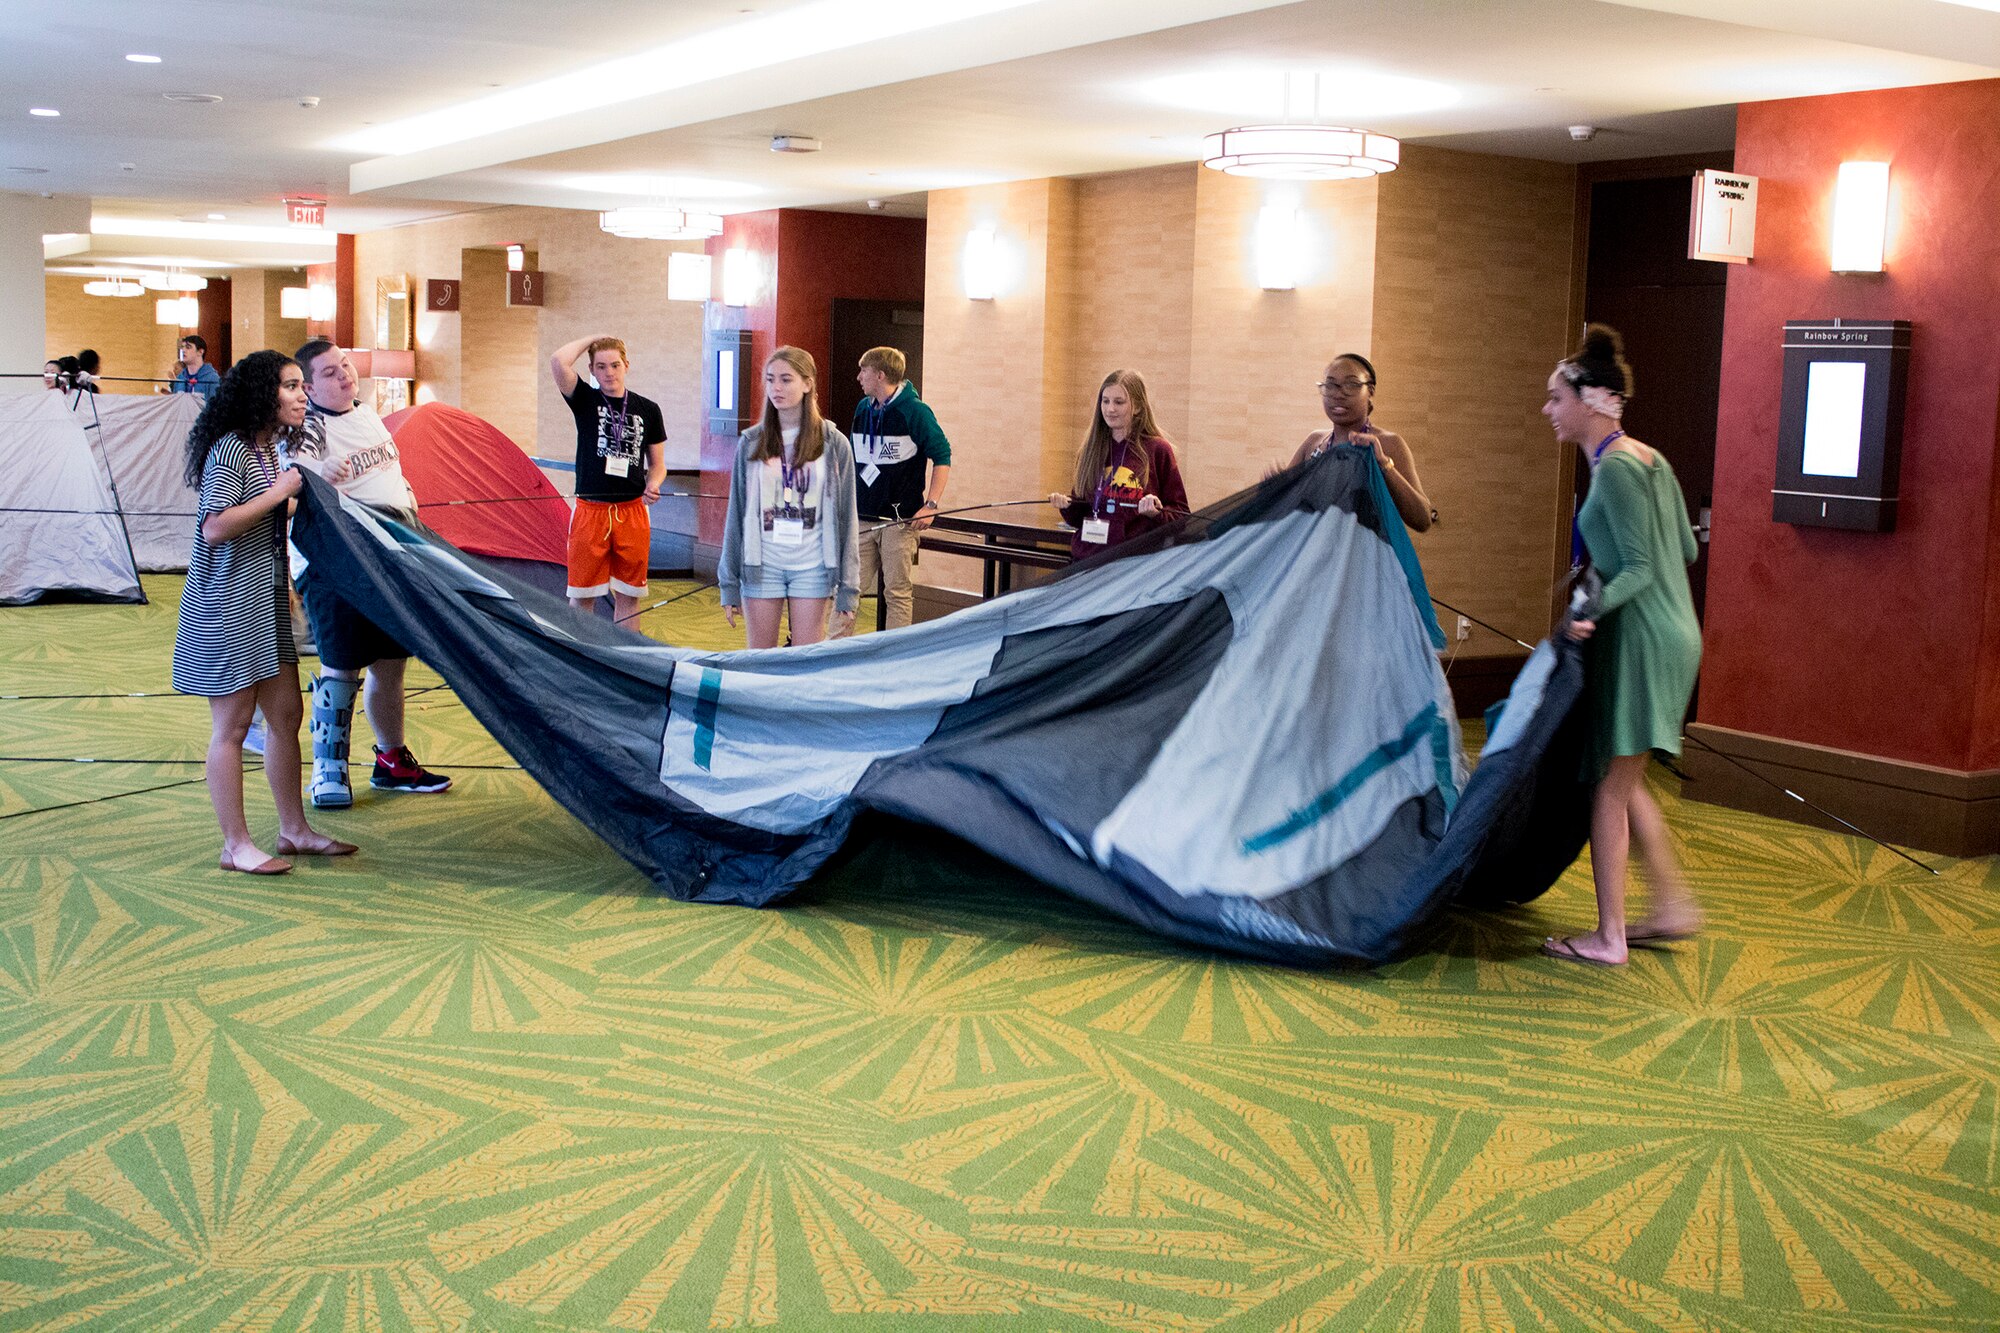 Teens of Reserve Citizen Airmen work together to pitch tents during a teamwork exercise at the Yellow Ribbon Reintegration Program event held March 16, 2018 in Orlando, Florida.